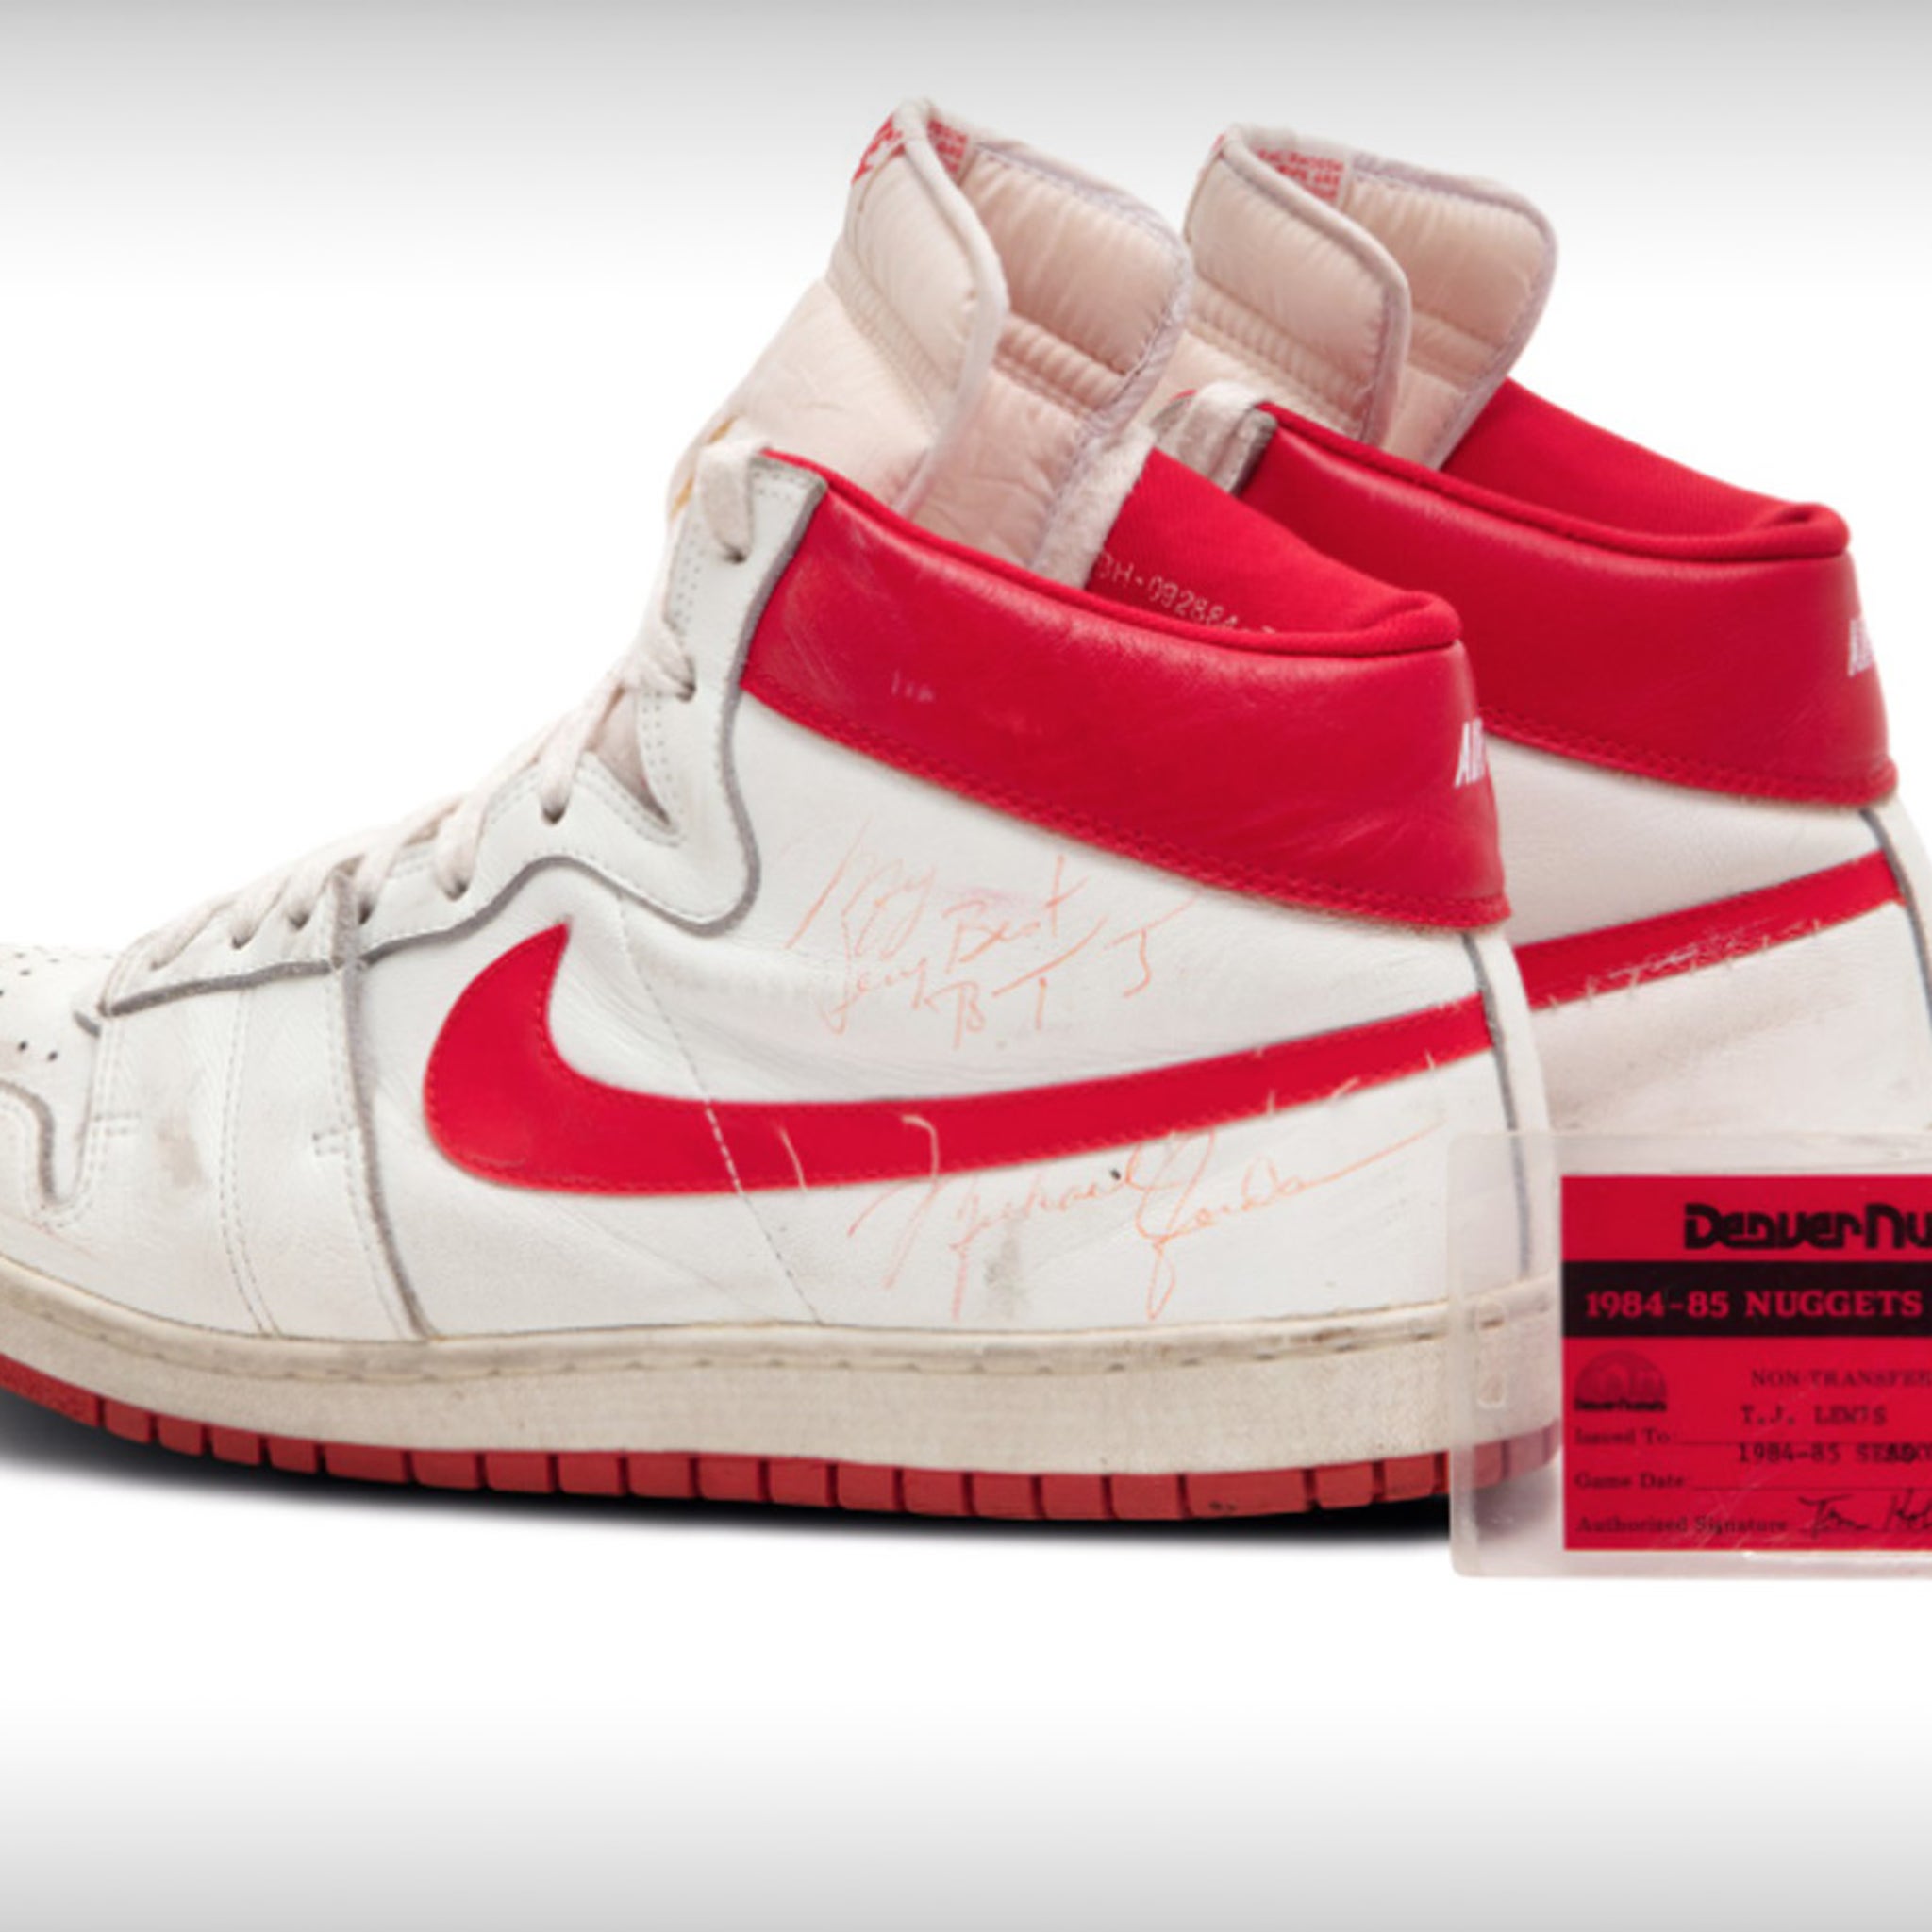 Michael Jordan sneakers sell for record $2.2 million - Los Angeles